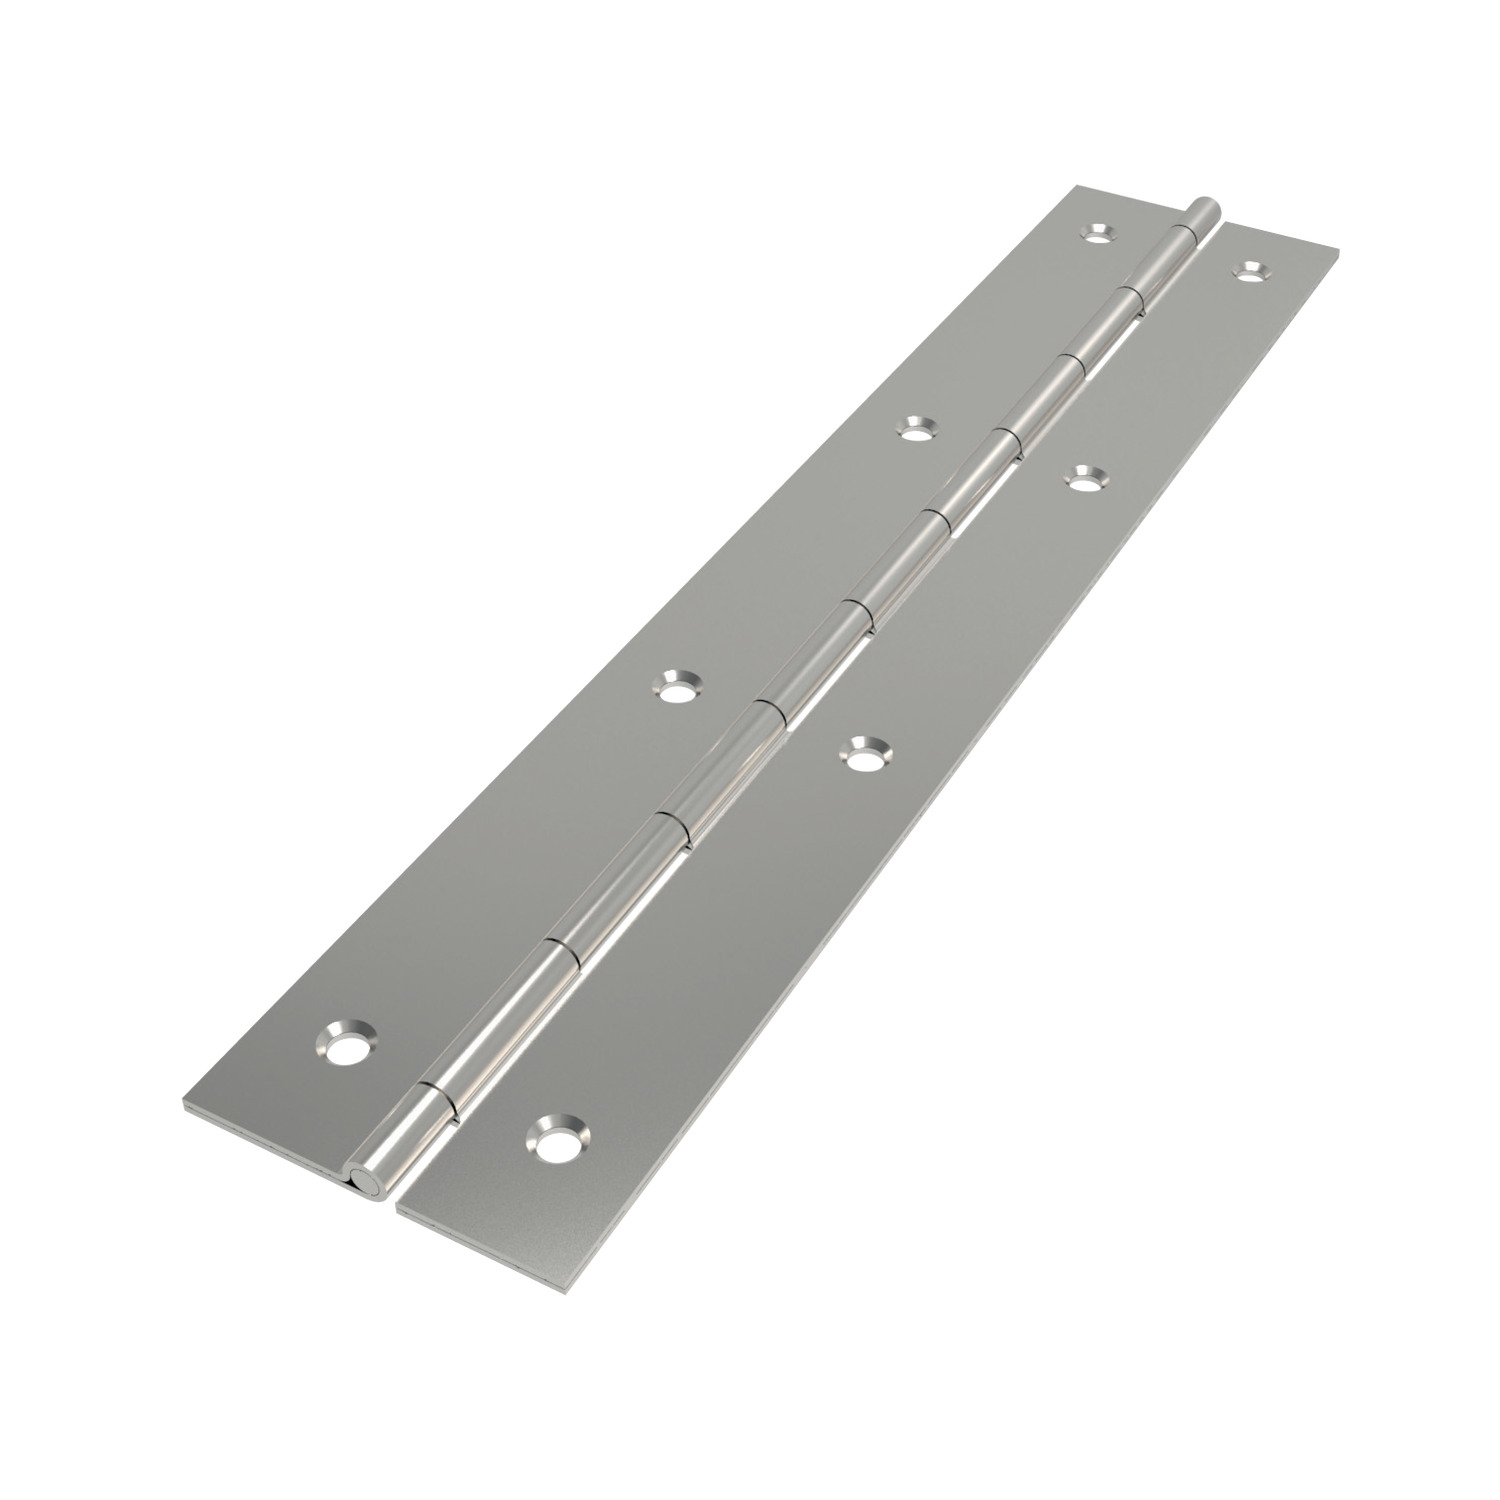 S0100.AC0324 Surface Mount - Piano Hinges Screw mount - Stainless steel. 240 x 30